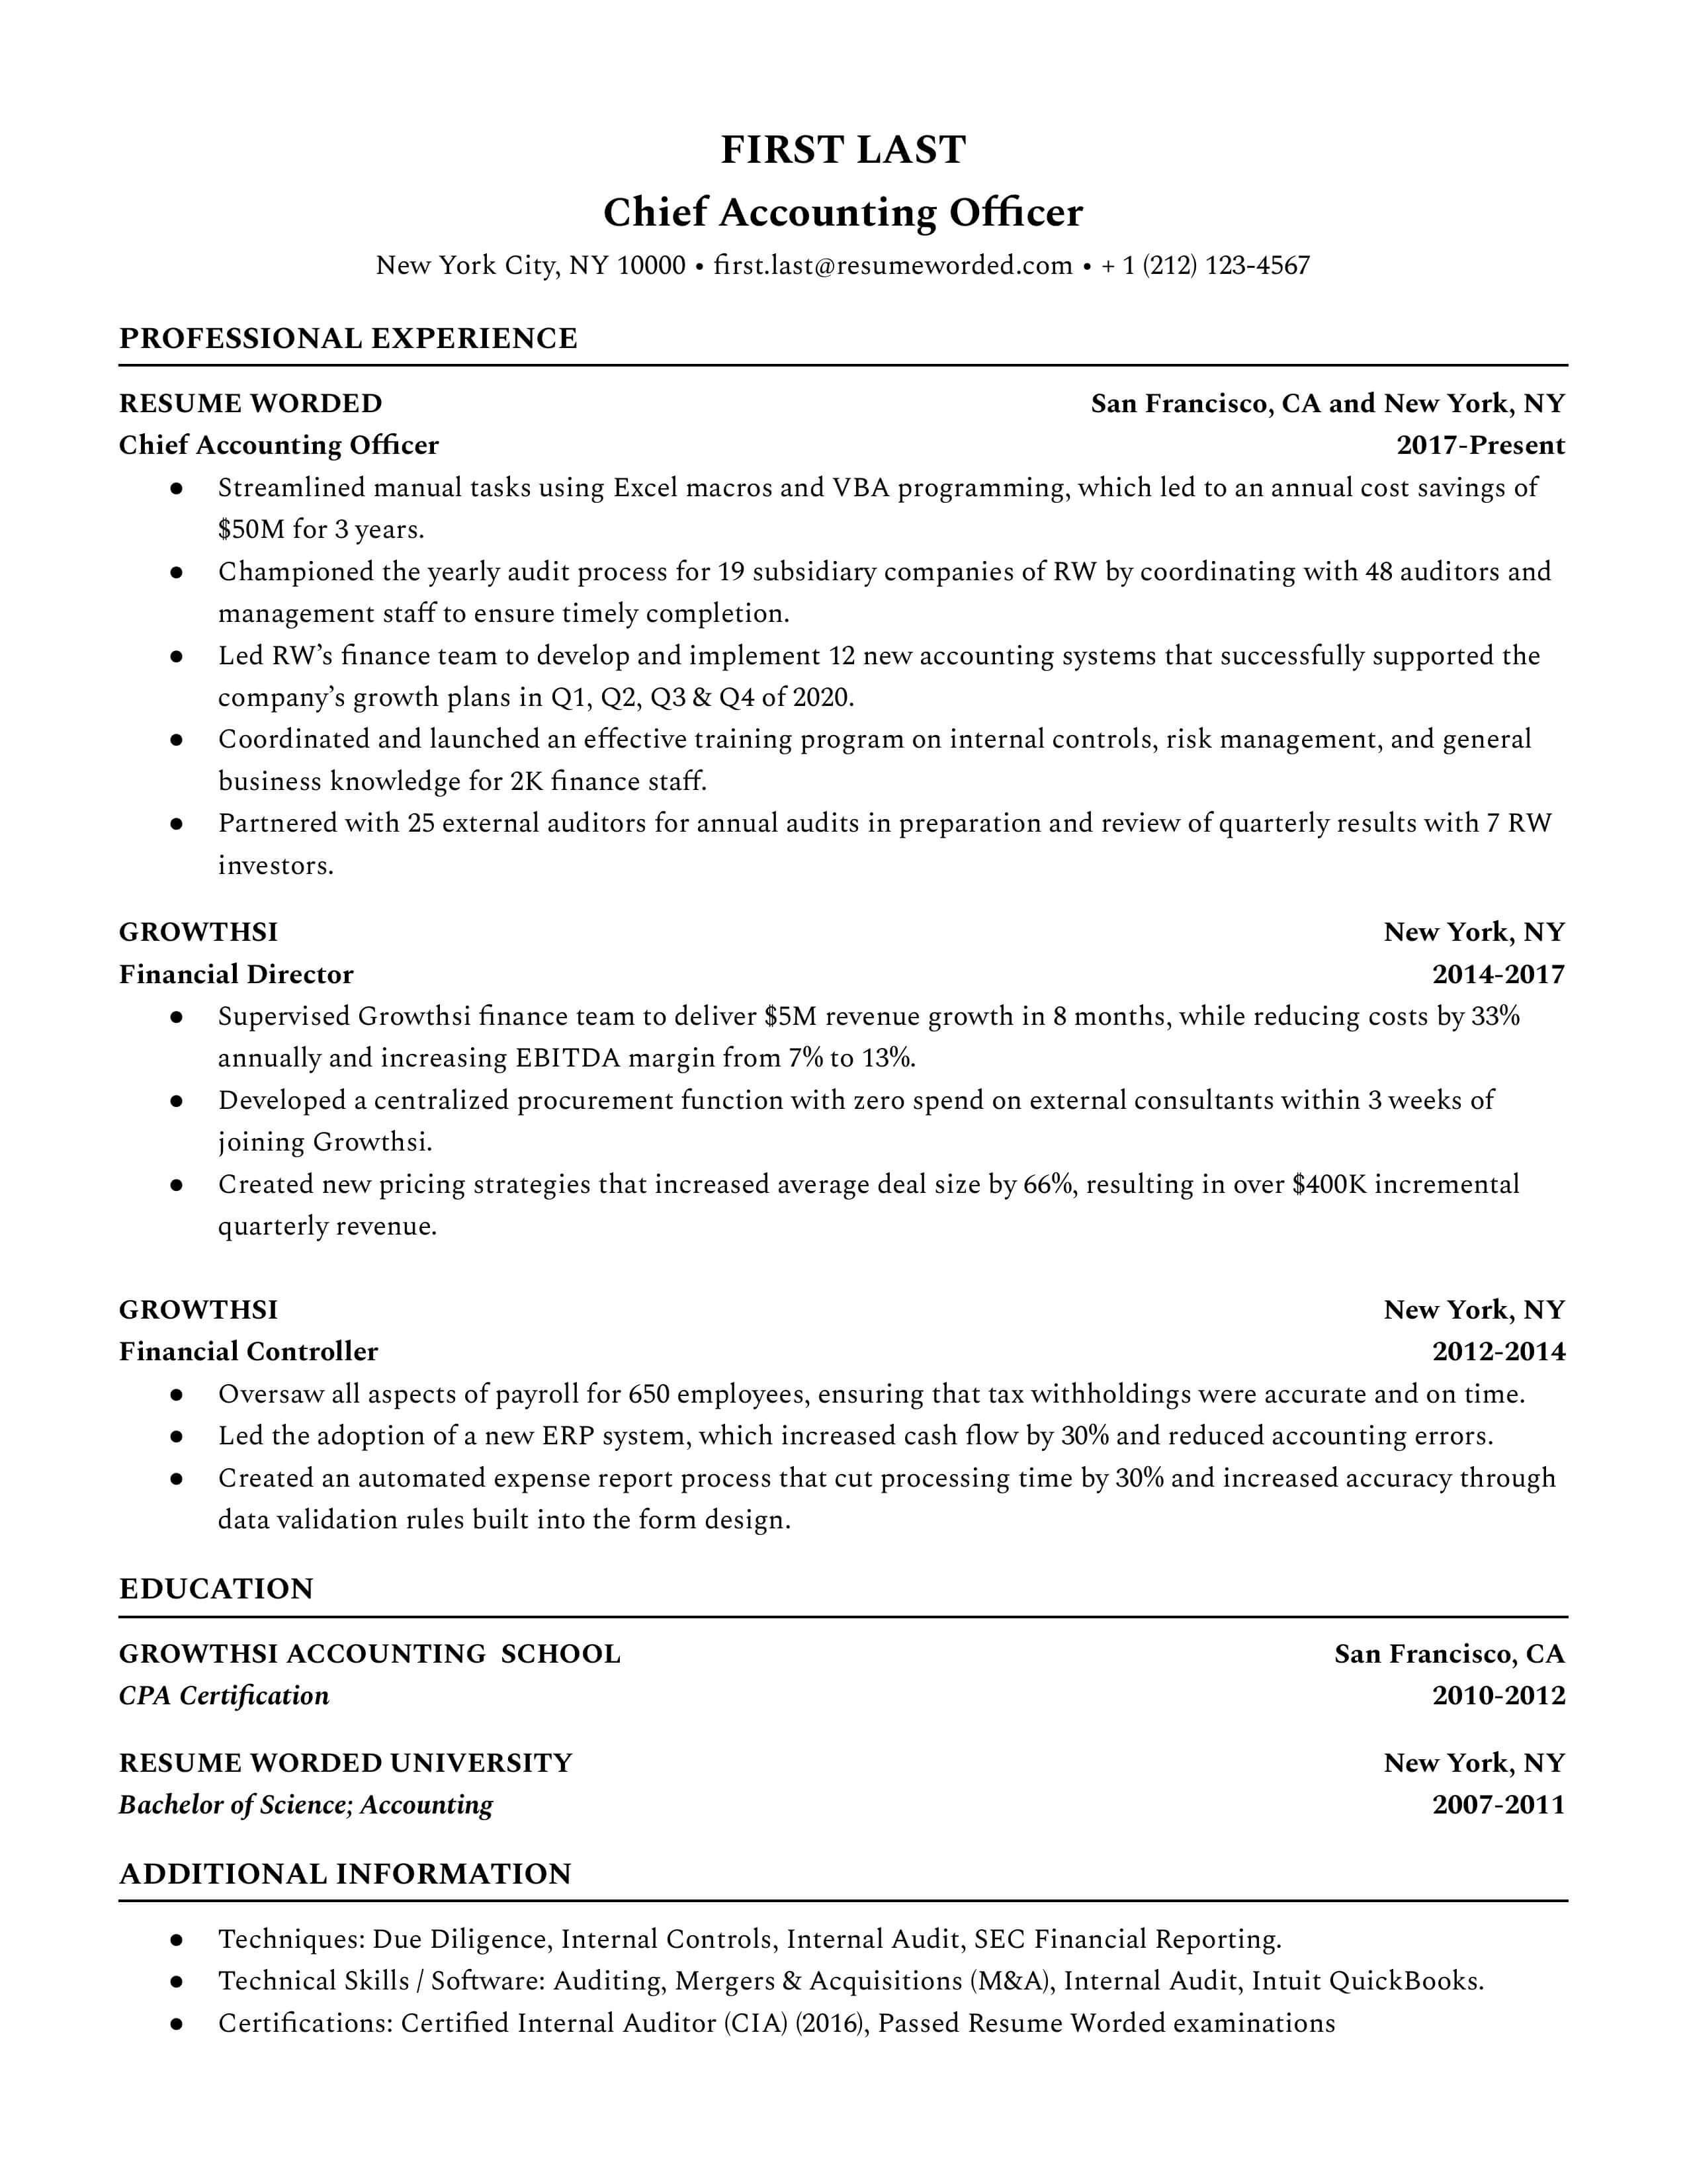 Chief Accounting Officer Resume Sample